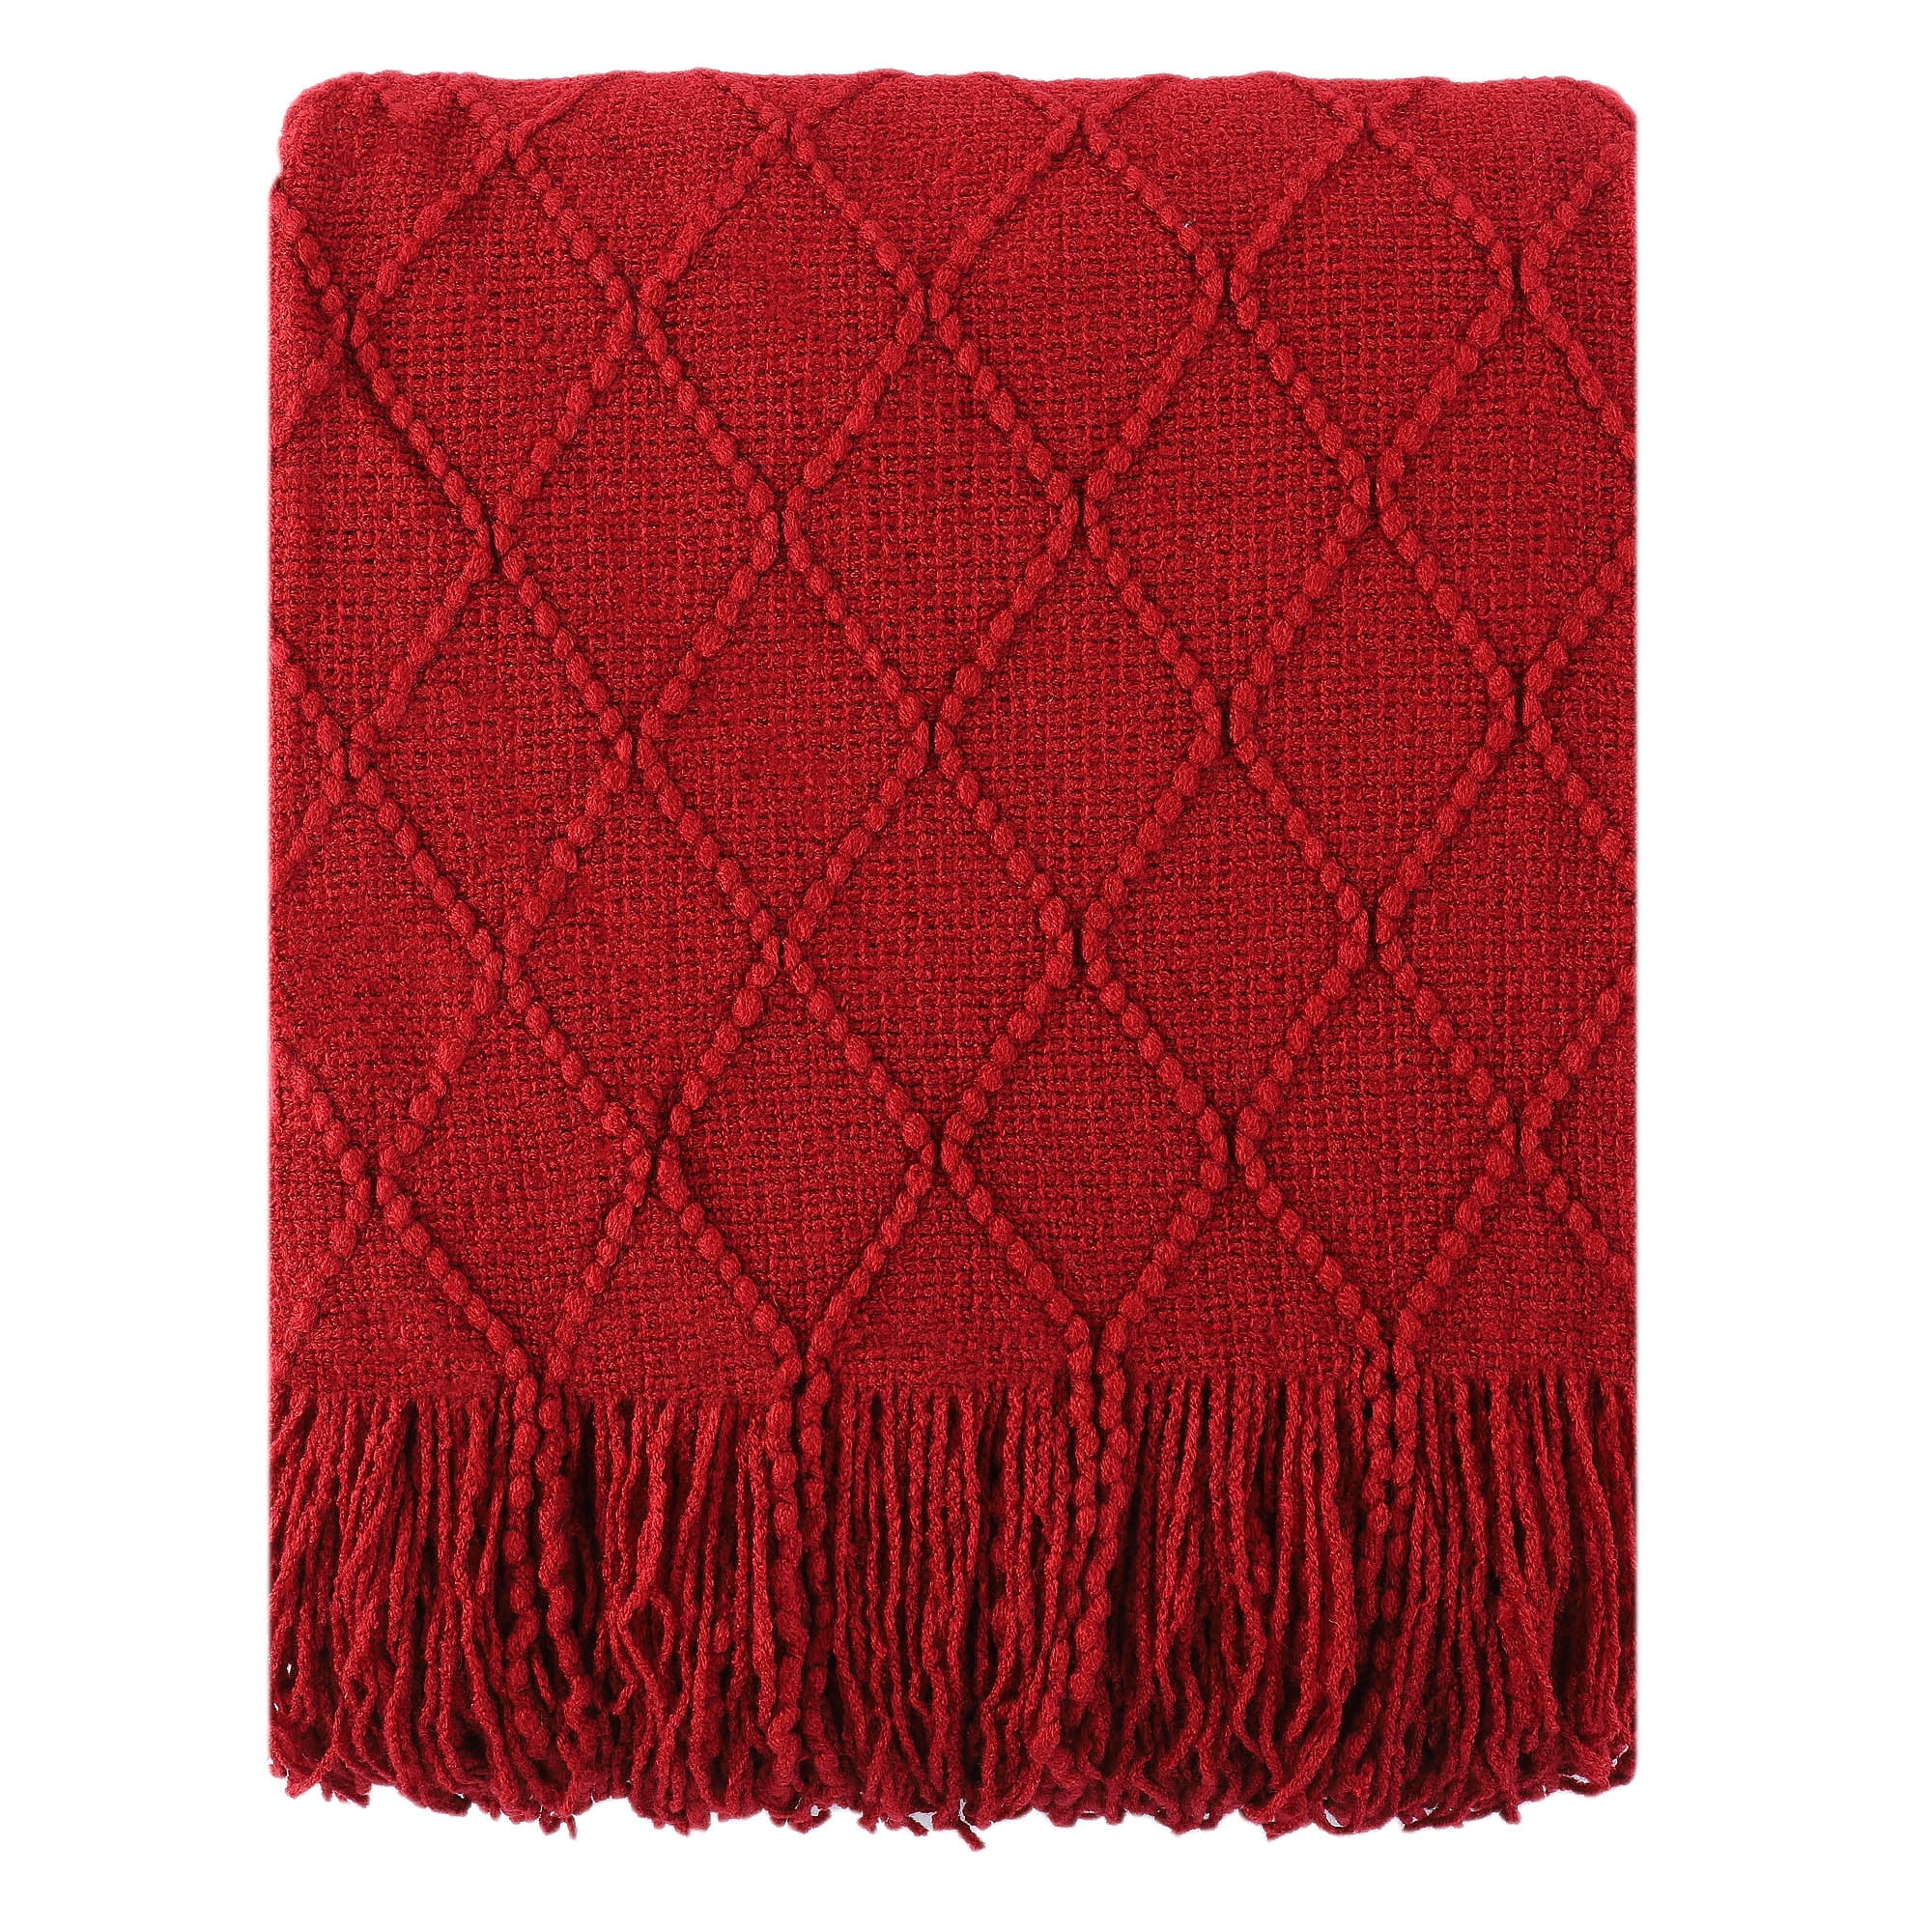 Battilo Christmas Decor Red Throw Blanket for Couch, Boho Bed Throws ...